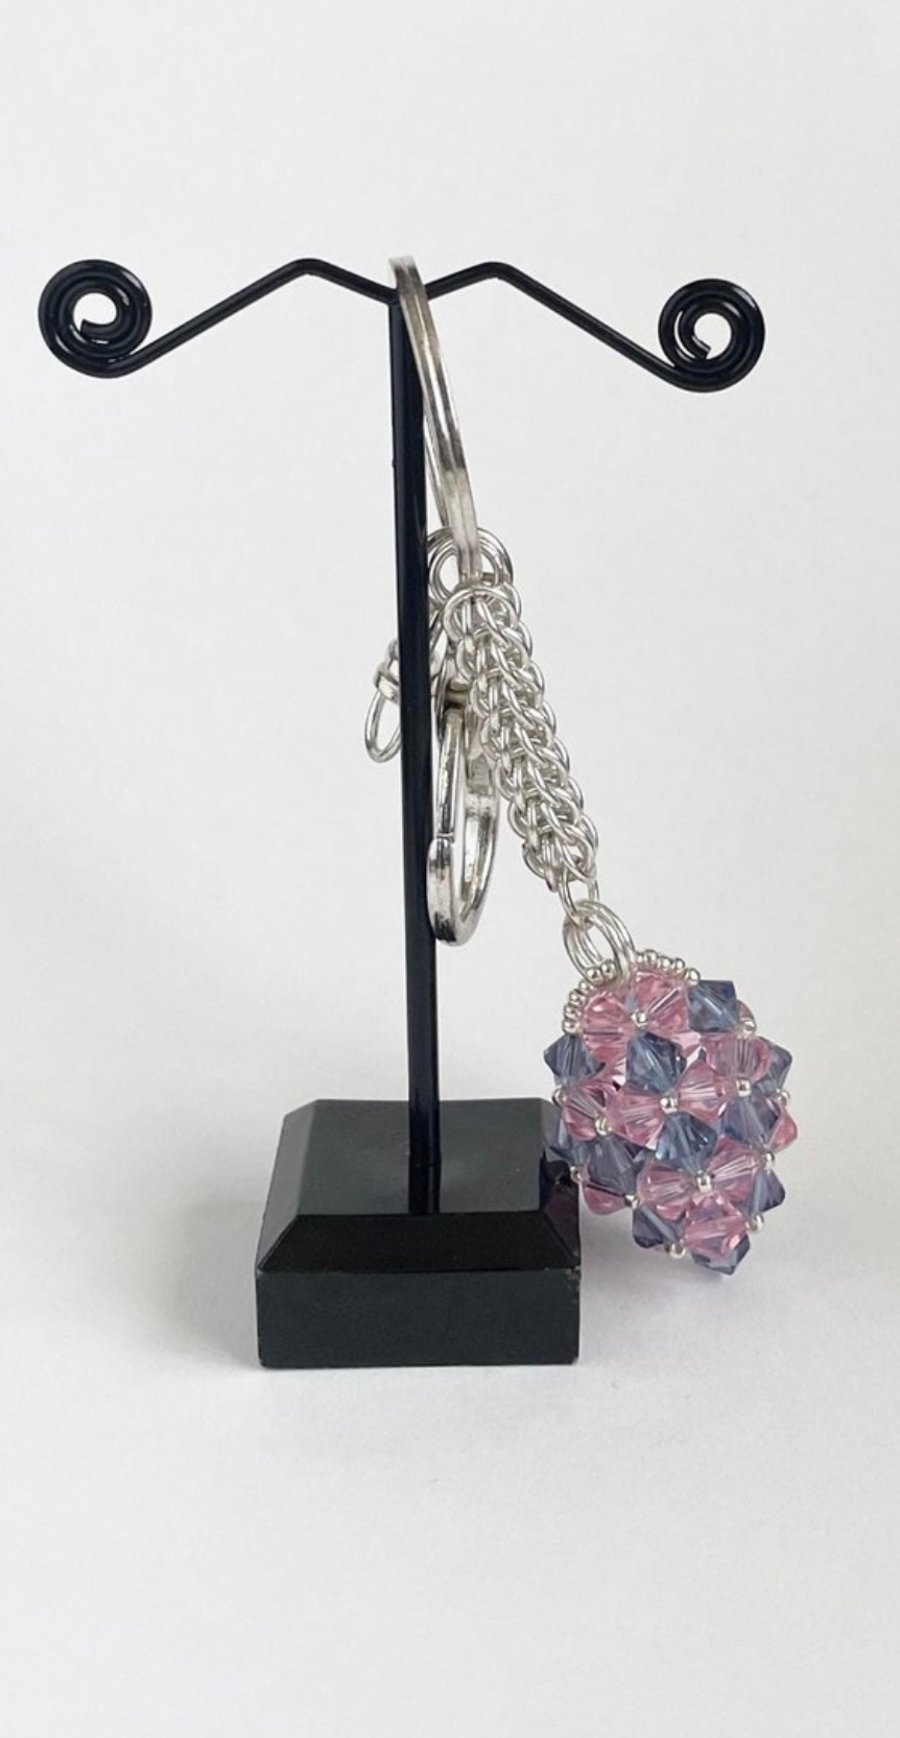 Handbag Charm, Egg Shaped Pink and Blue Crystal, Chainmaille Chain and Keyring